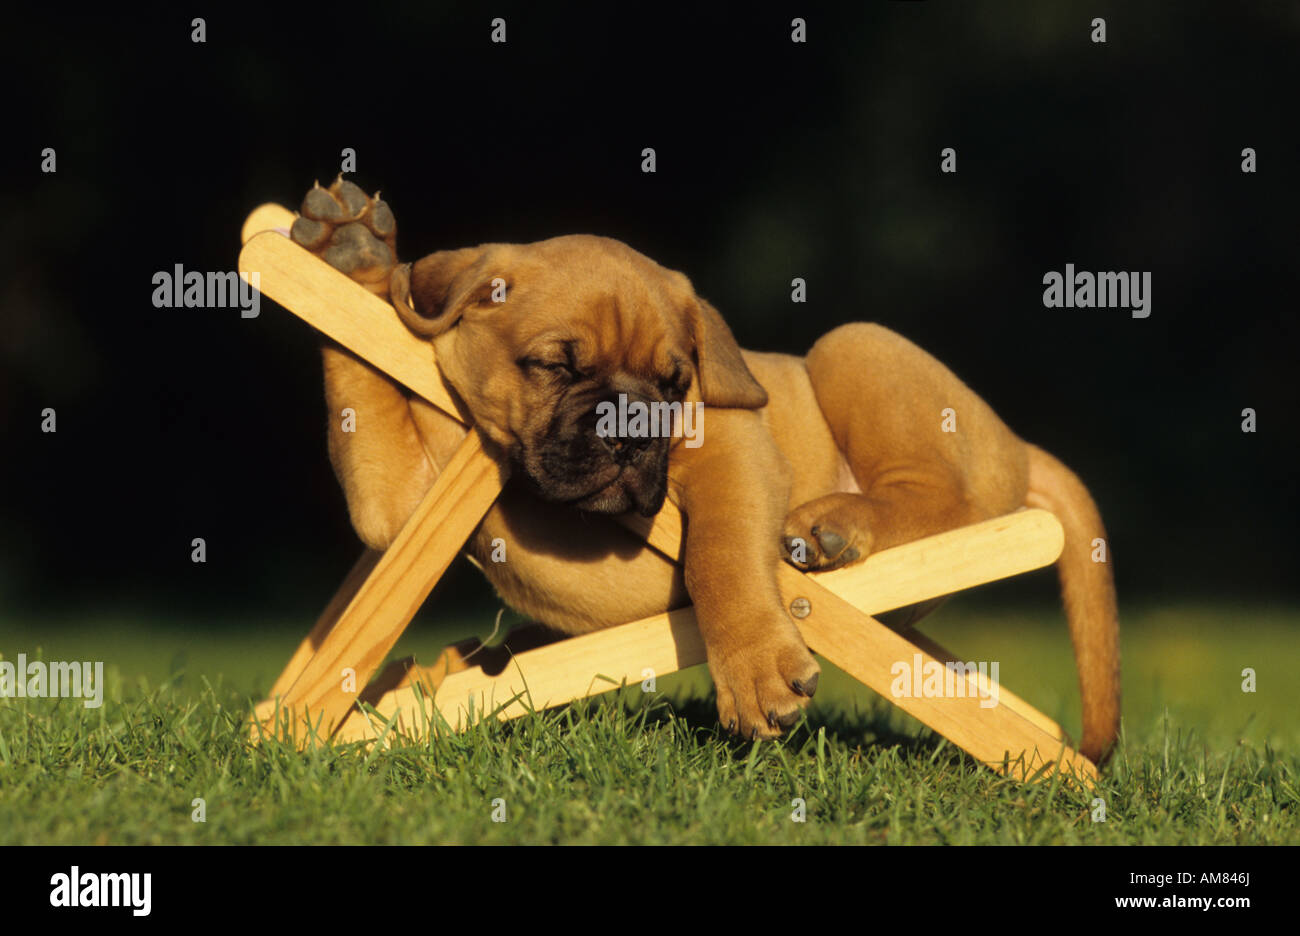 Bordeaux Mastiff (Canis lupus familiaris), puppy sleeping in a toy deck chair Stock Photo